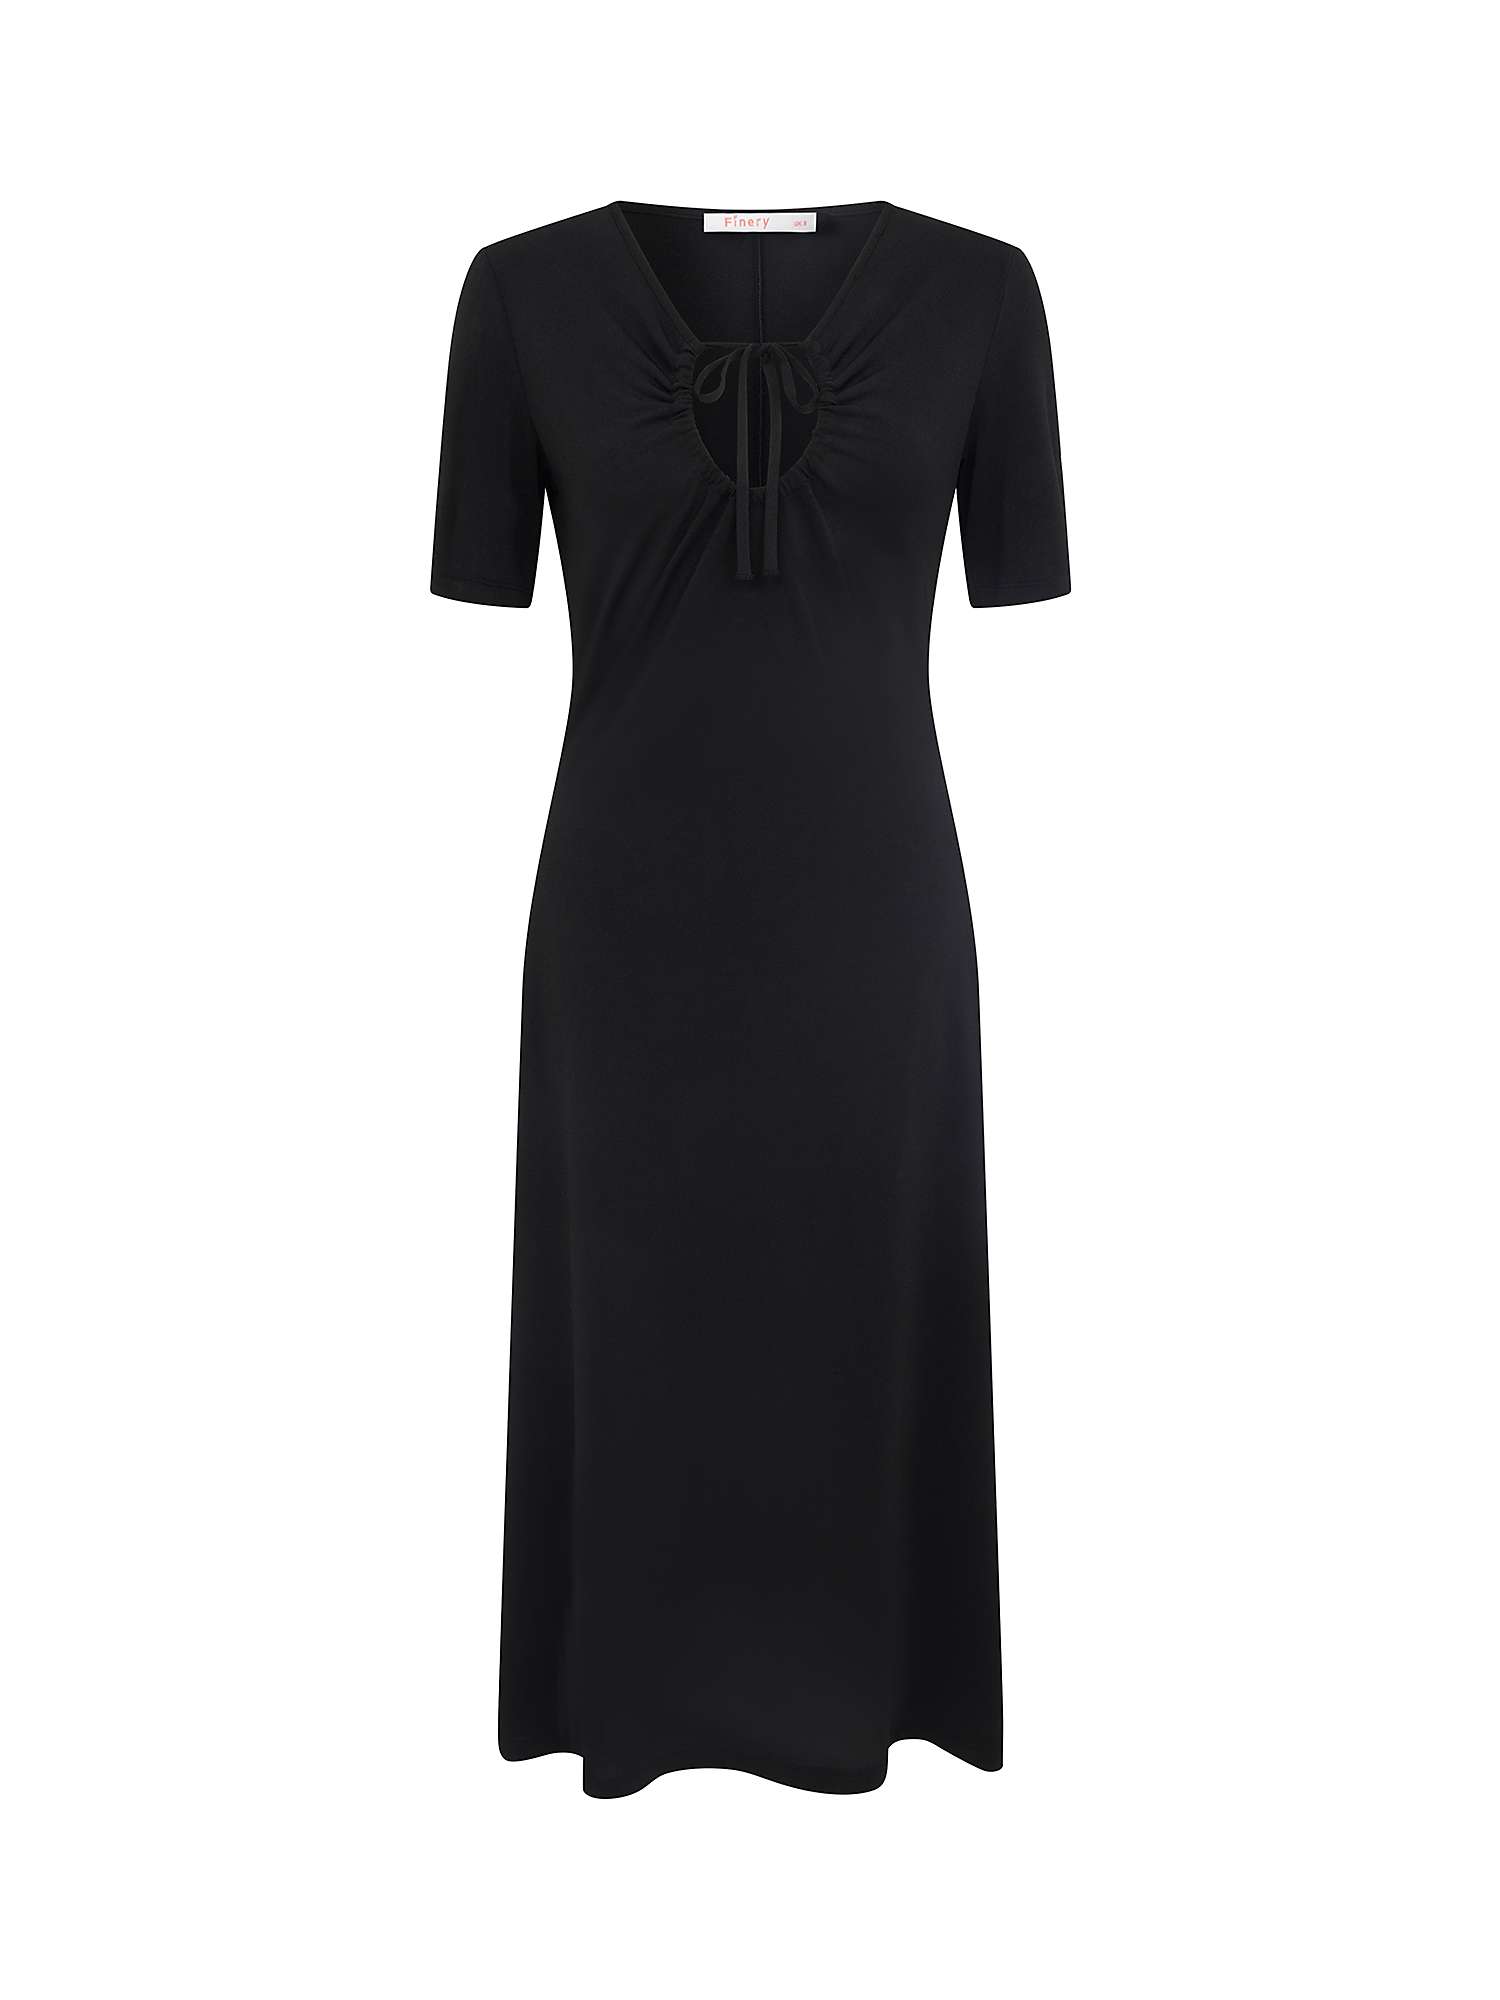 Finery Alice Cut Out Front Midi Dress, Black at John Lewis & Partners